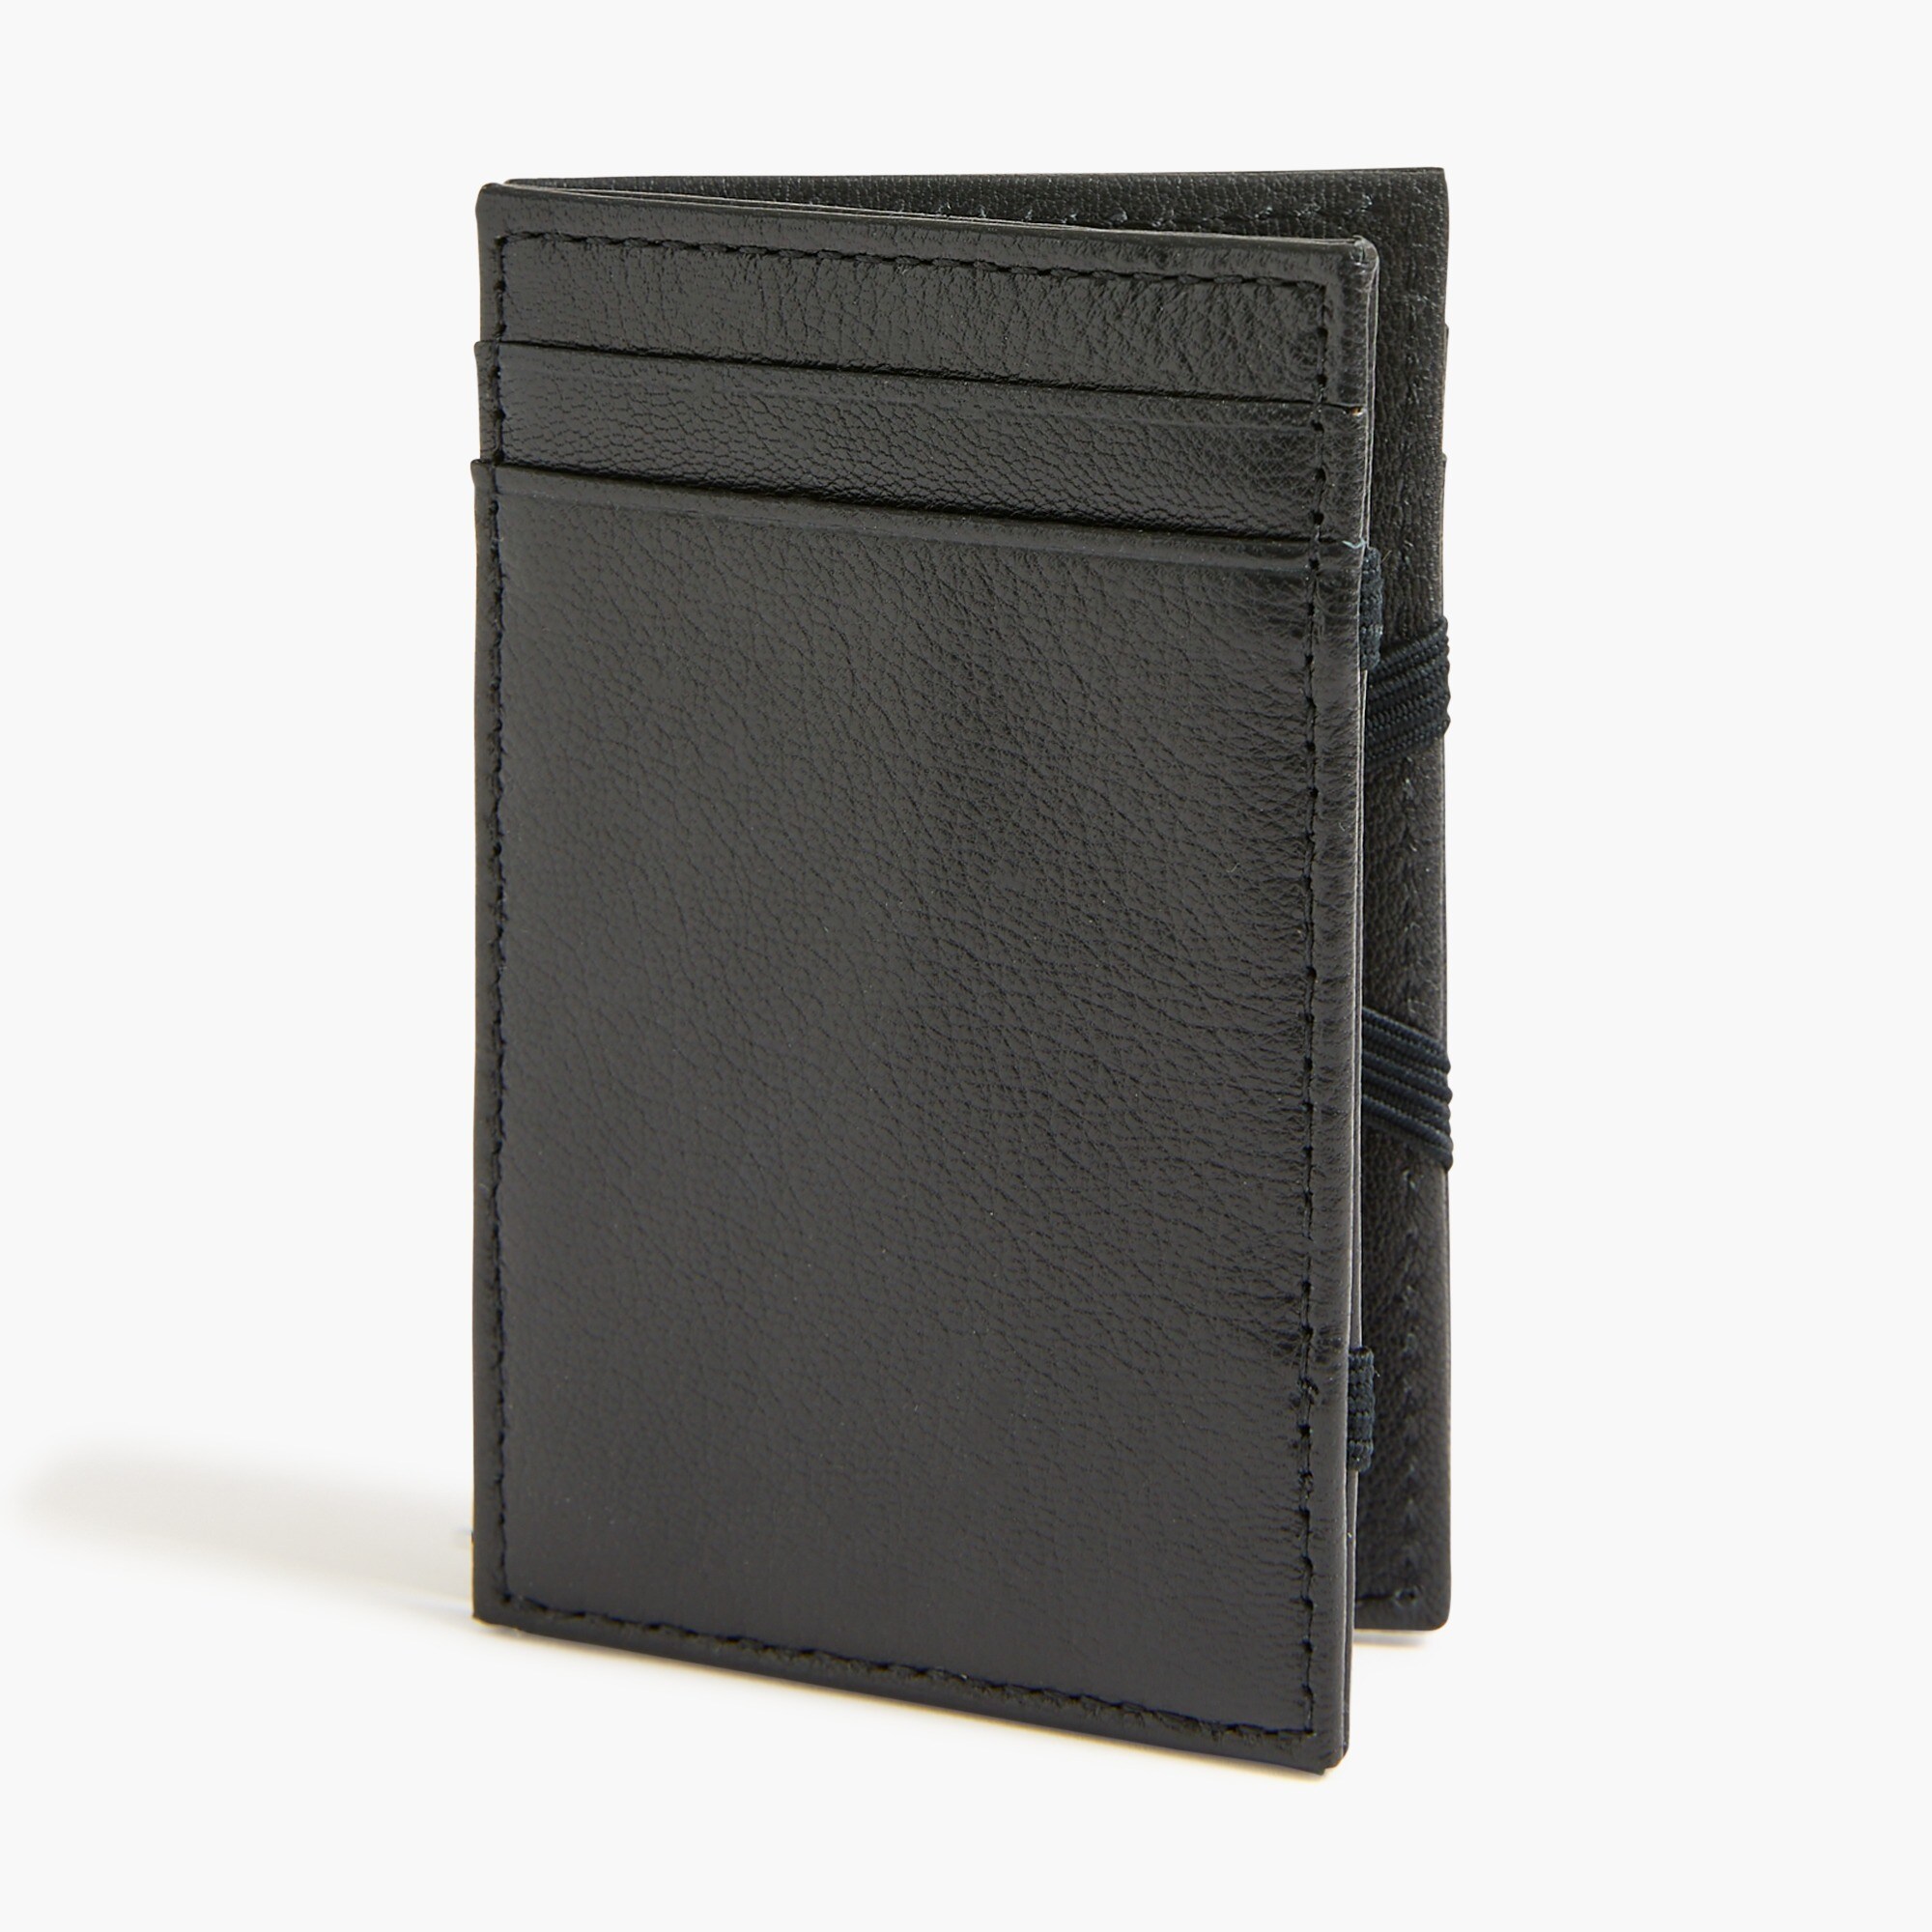  Pebbled leather wallet